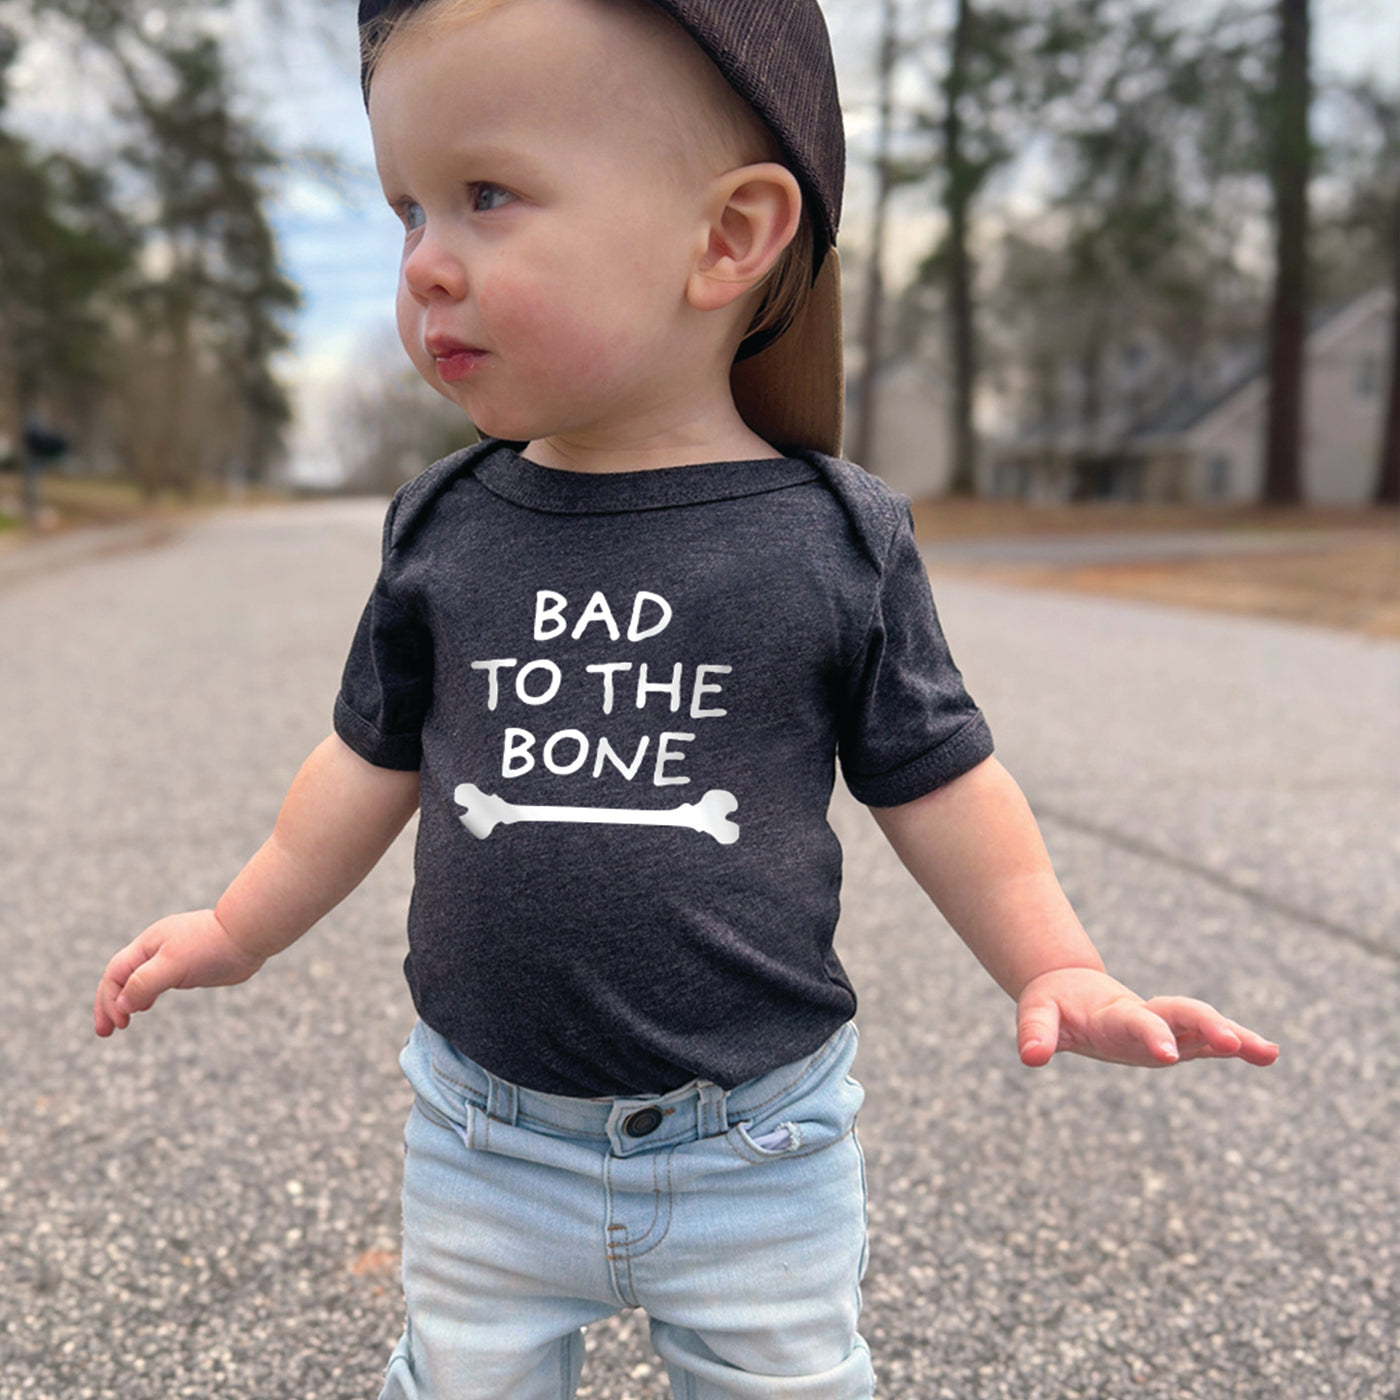 Little boy wearing short sleeve white onesie with black yellow orange chicks dig me print, standing outside wearing a checkered black and white hat and jeans 